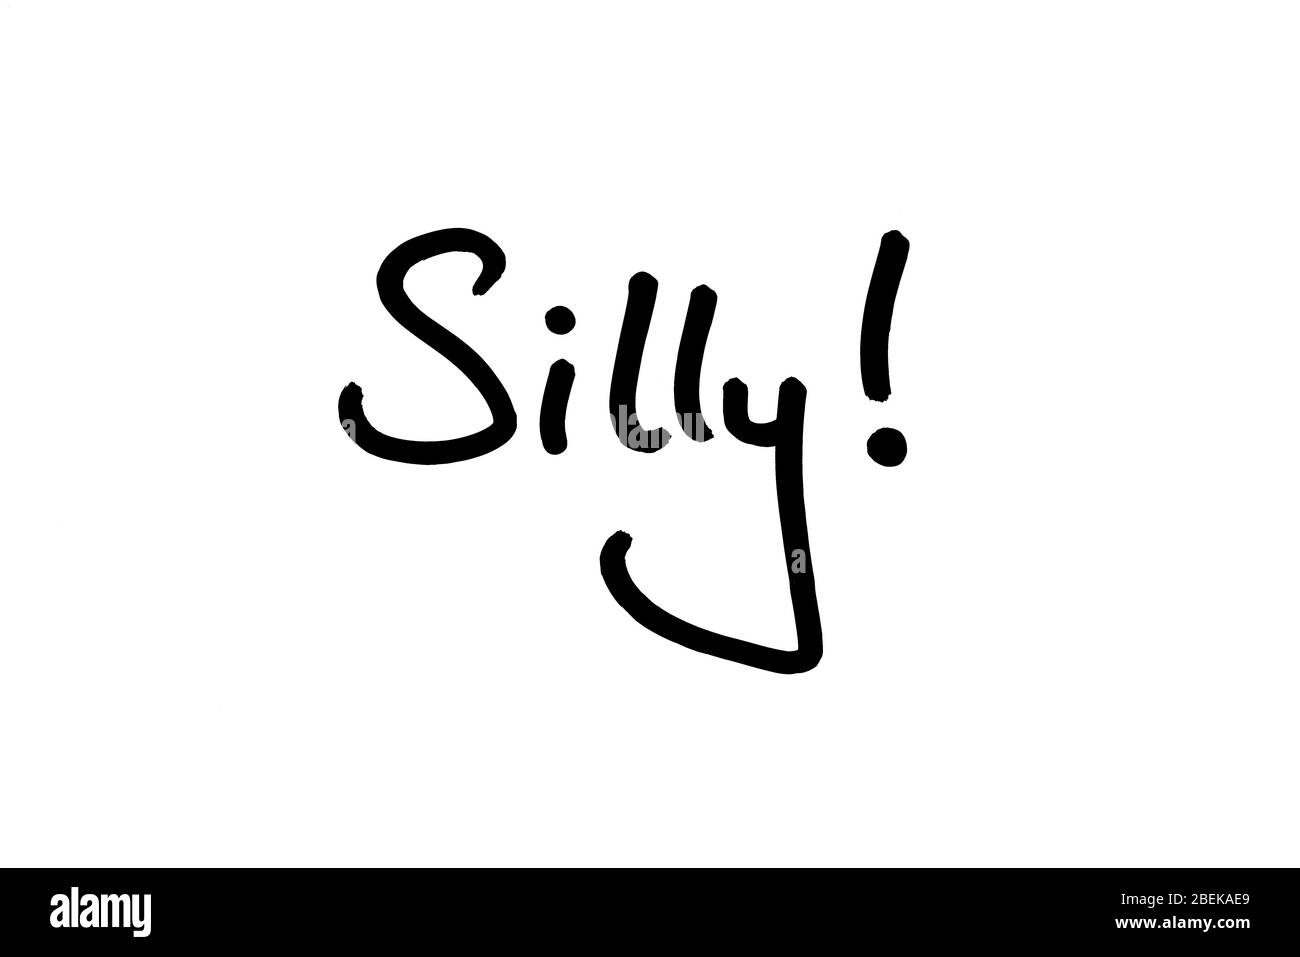 The word Silly! handwritten on a white background. Stock Photo